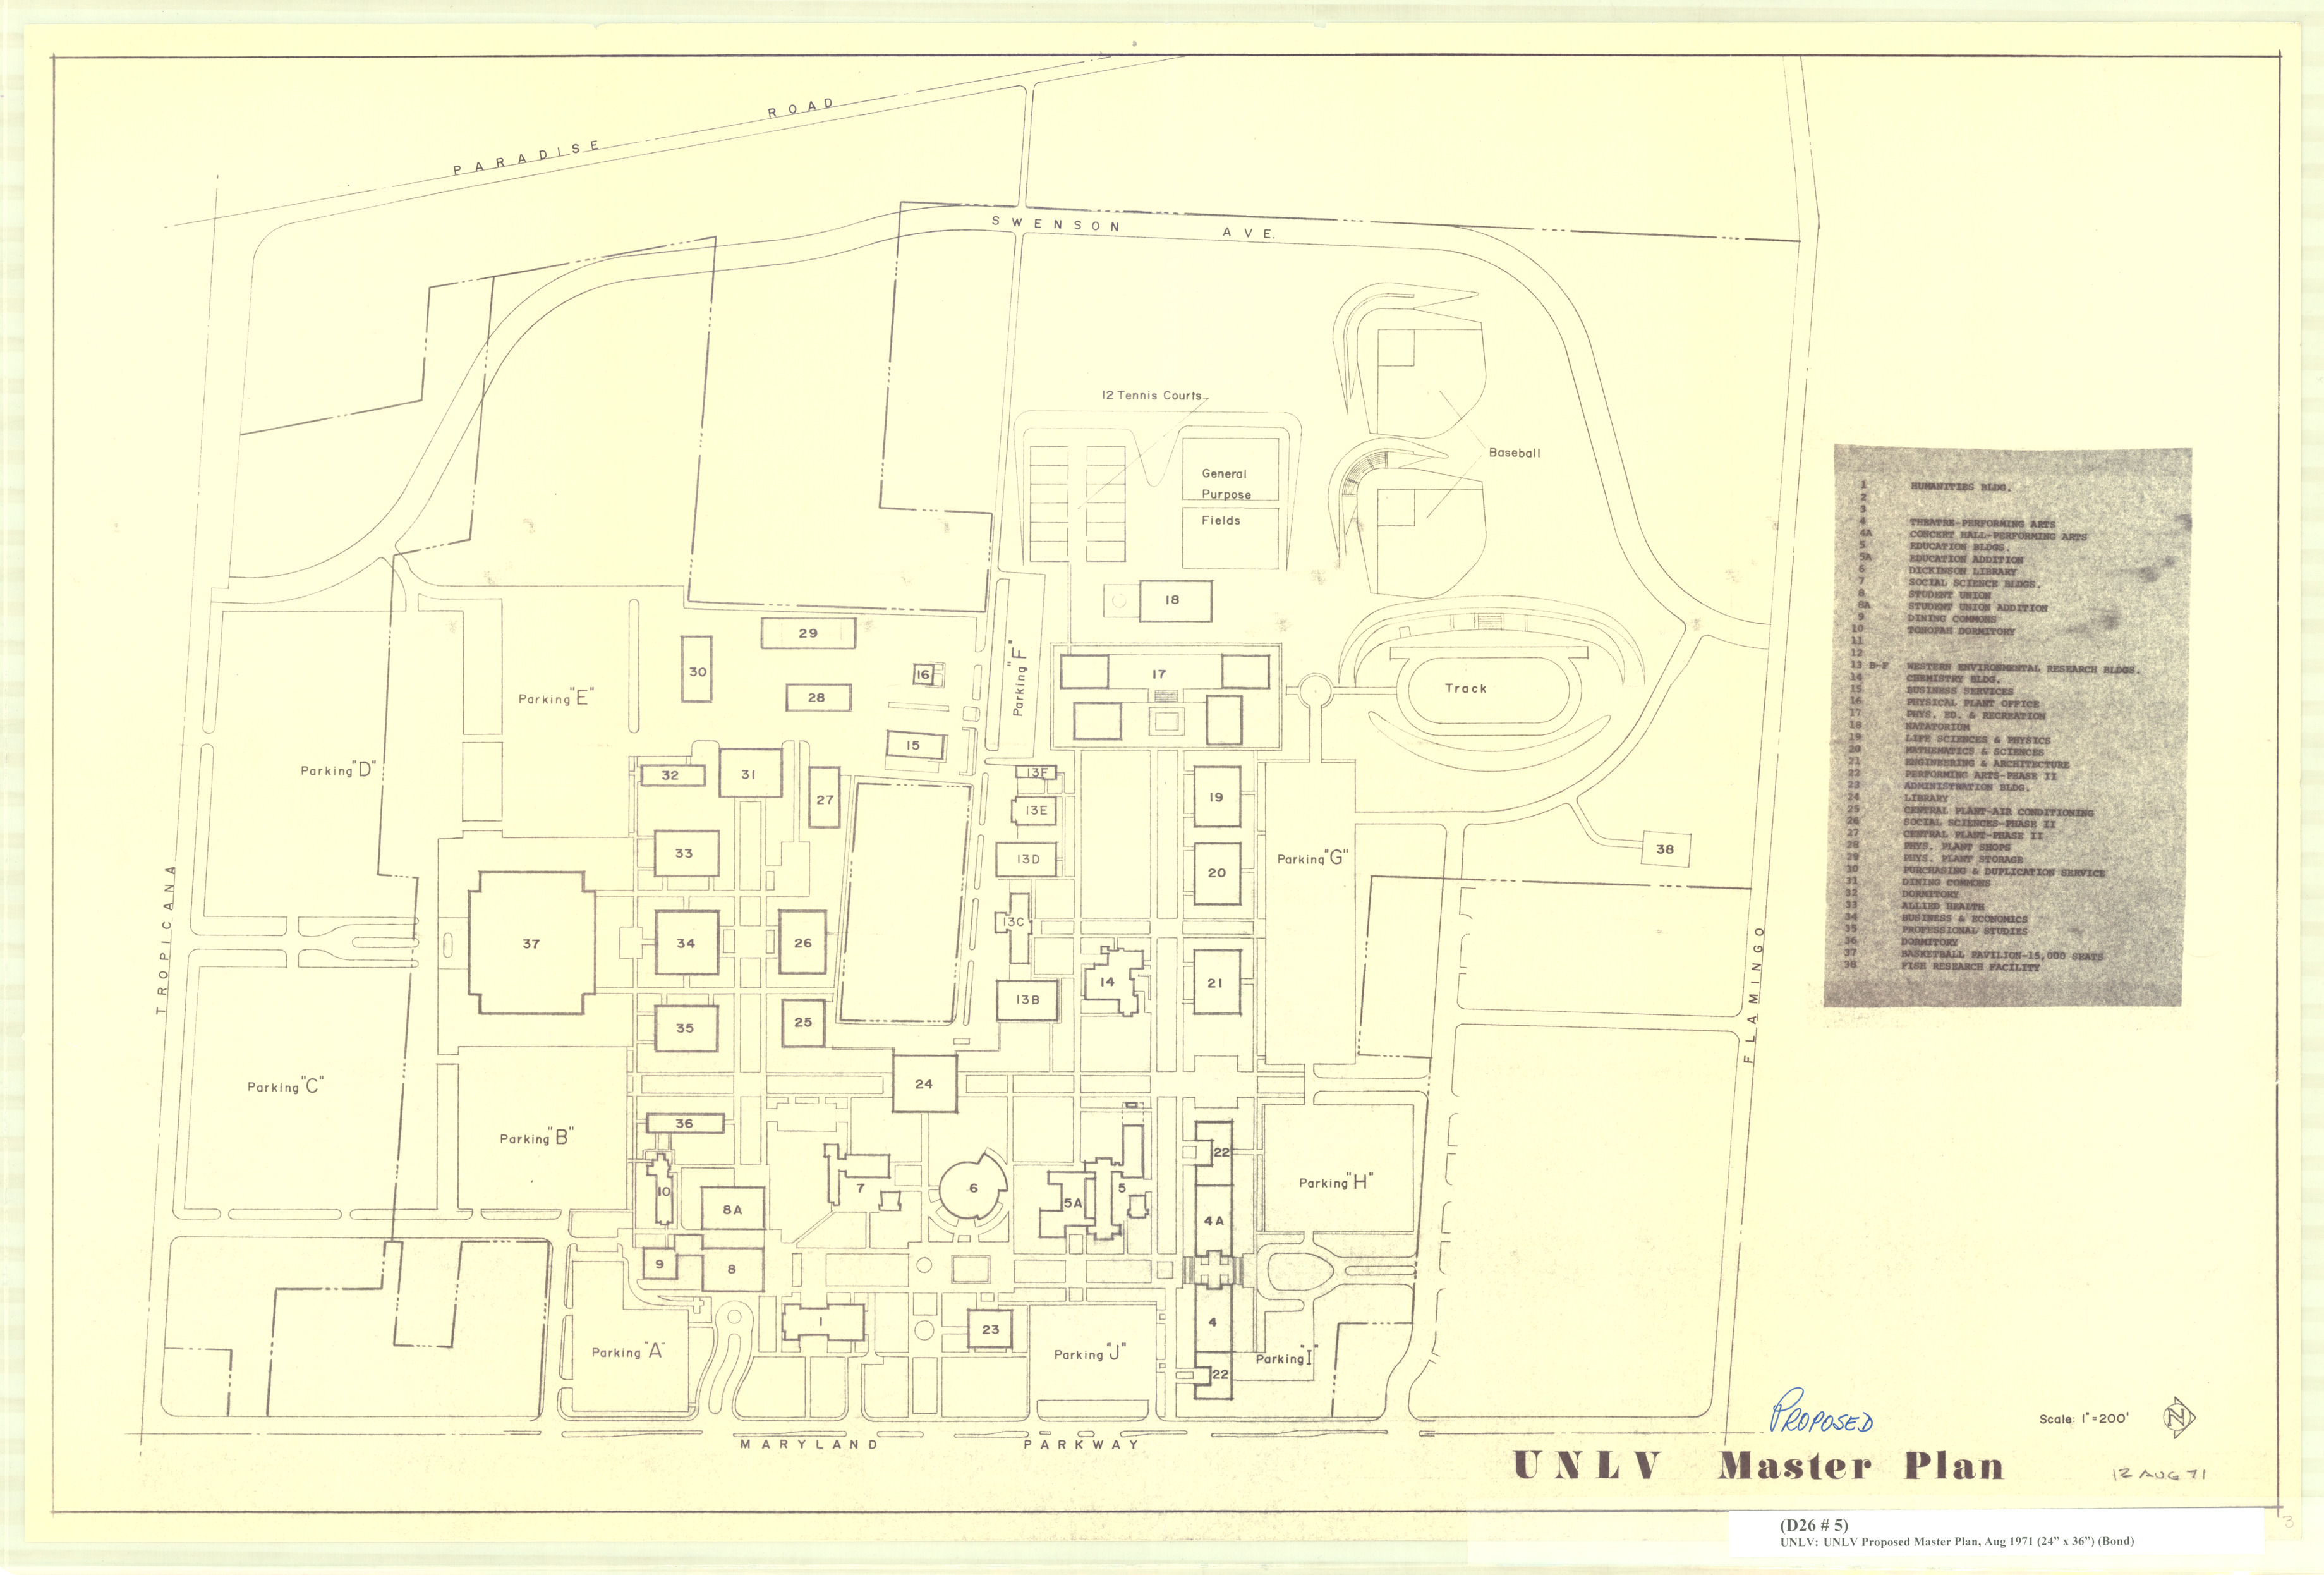 Nevada Southern University master plan: architectural drawings, image 005